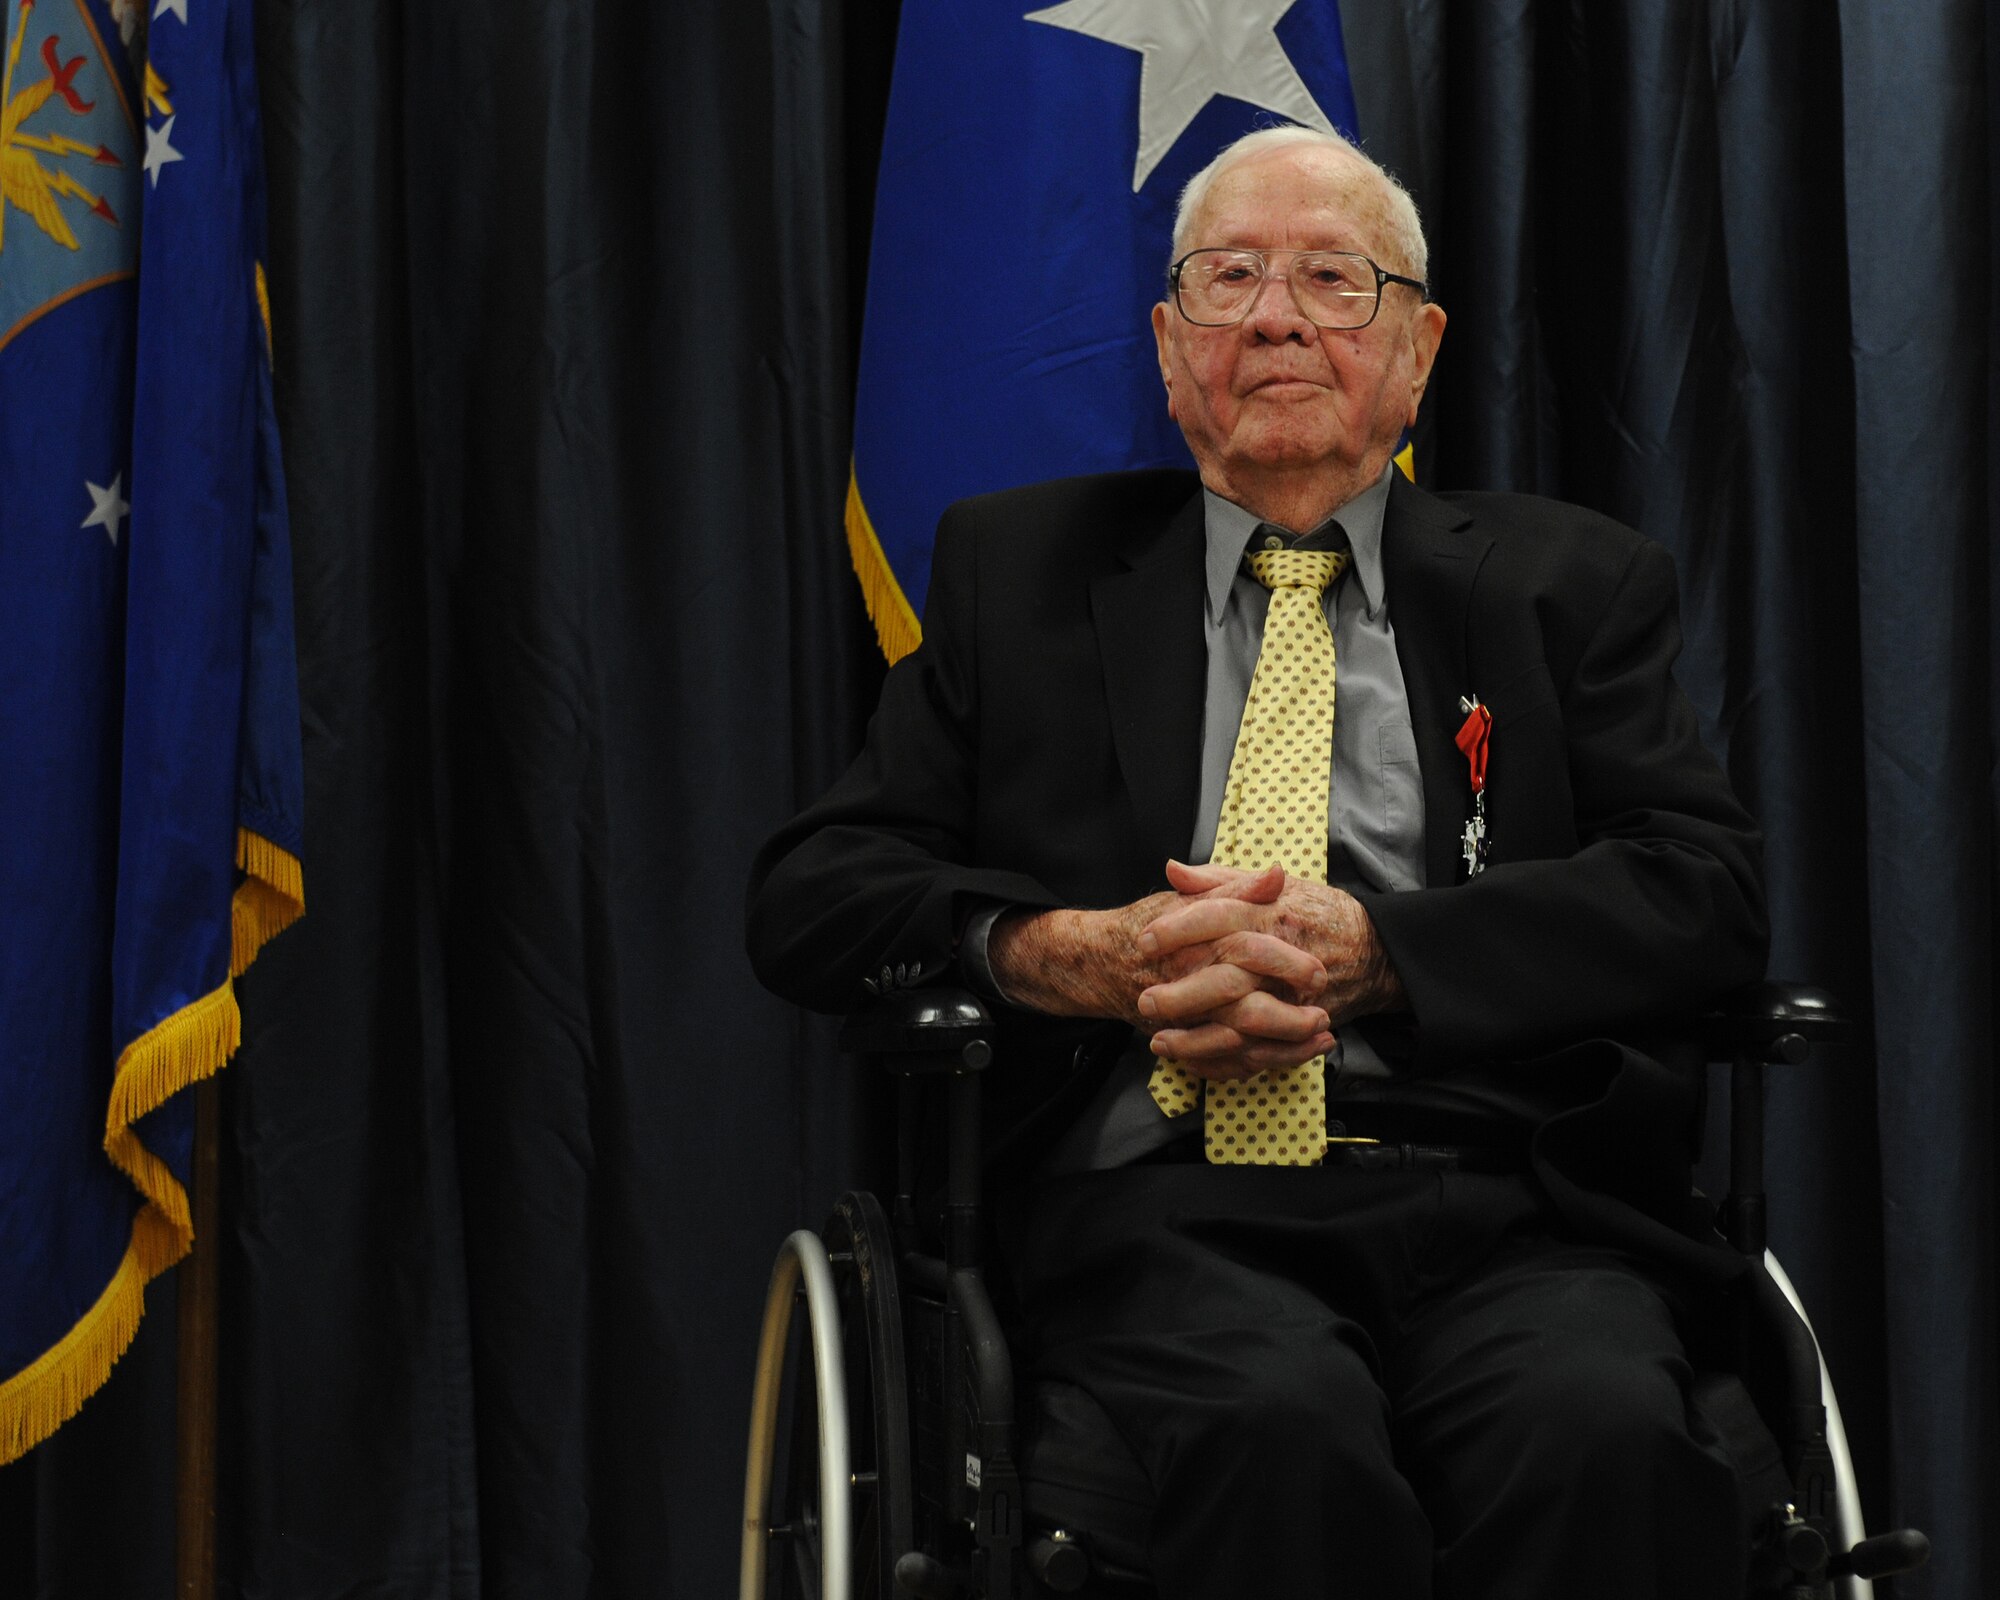 John Carpenter, a World War II veteran, was presented the French Legion of Honor for his service during World War II on Barksdale Air Force Base, La., July 1, 2014. As a logistics soldier during World War II, Carpenter received recognition from General George Patton for his contributions to the war effort. Carpenter received the Bronze Star, which was an uncommon award given to logistics soldiers. (U.S. Air Force photo/Senior Airman Benjamin Gonsier)